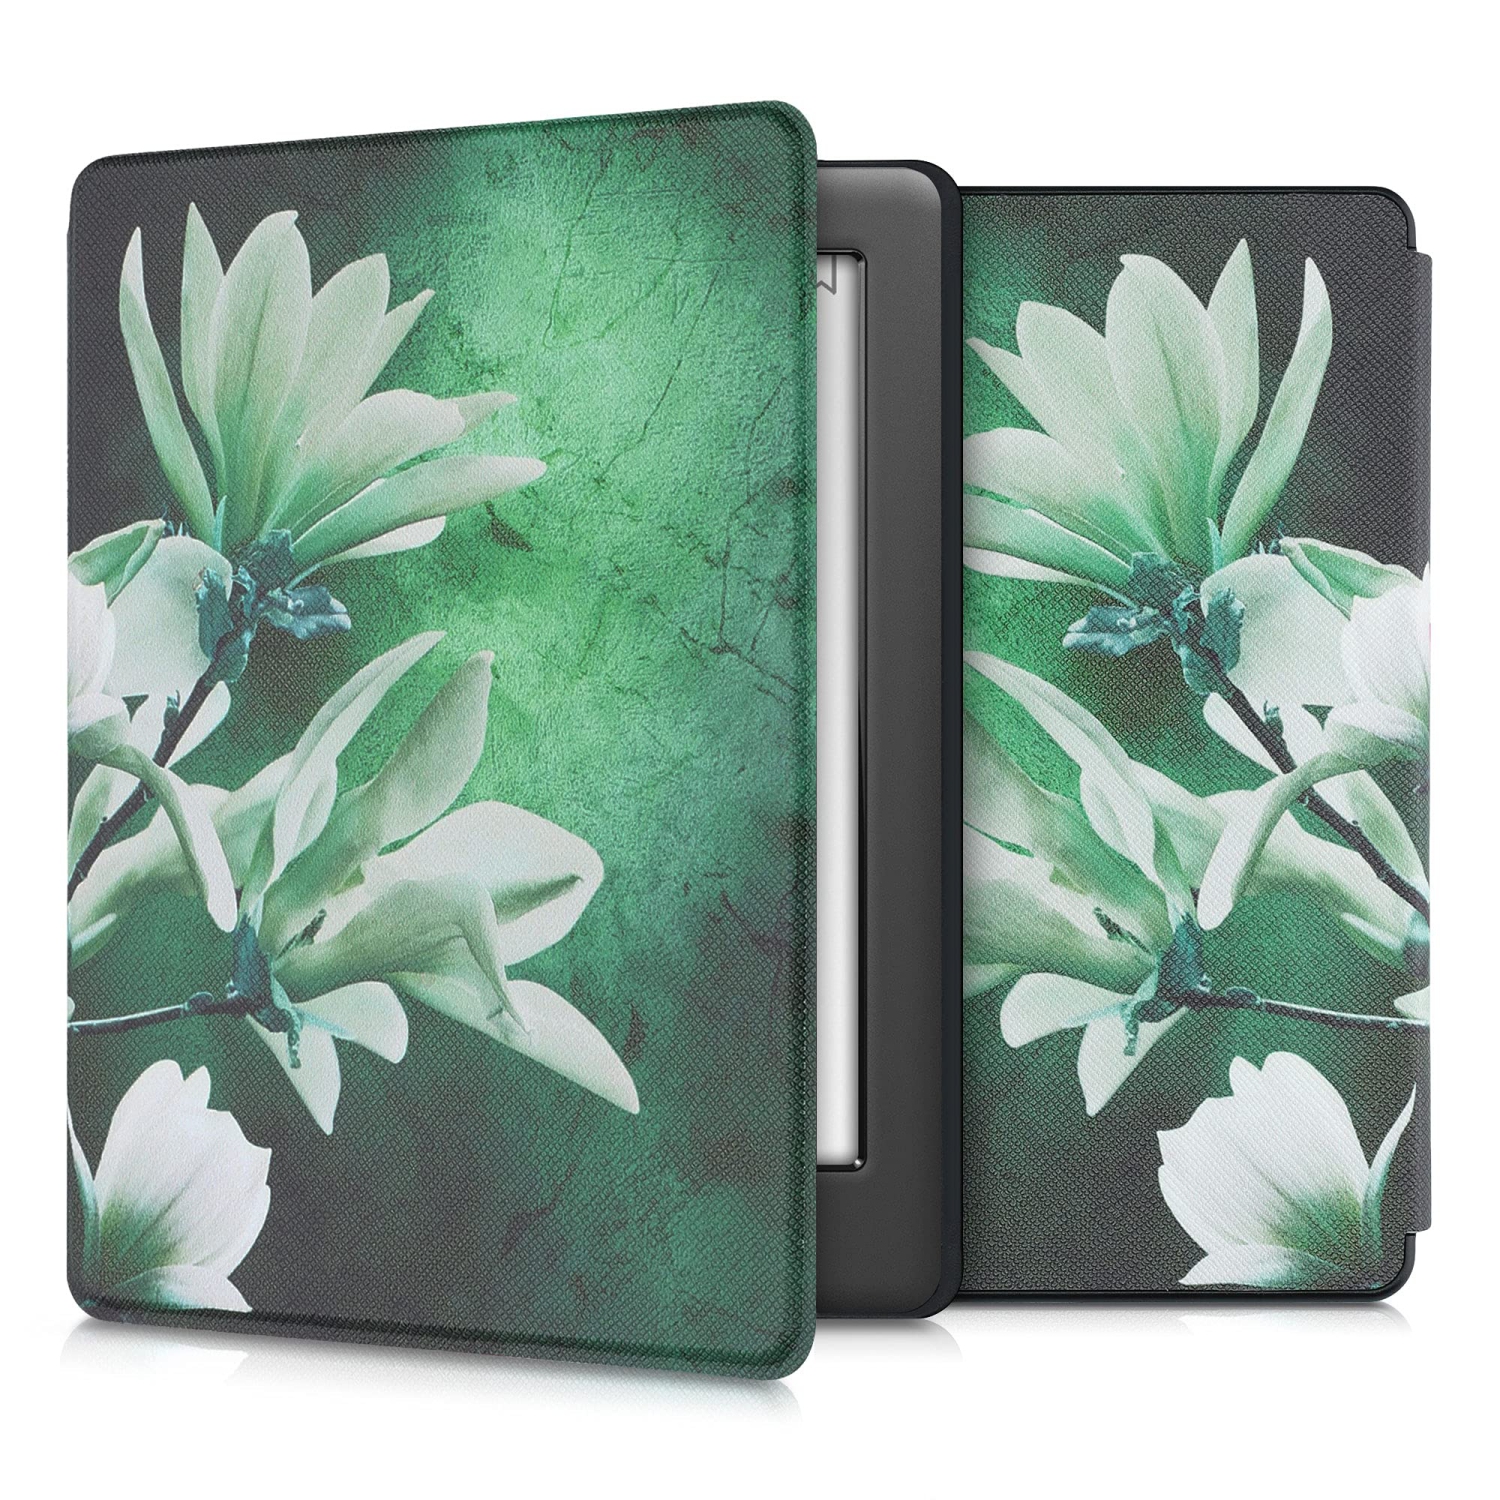 kwmobile Case Compatible with Kobo Glo HD/Touch 2.0 Case e-Reader Cover Magnolias Grey 